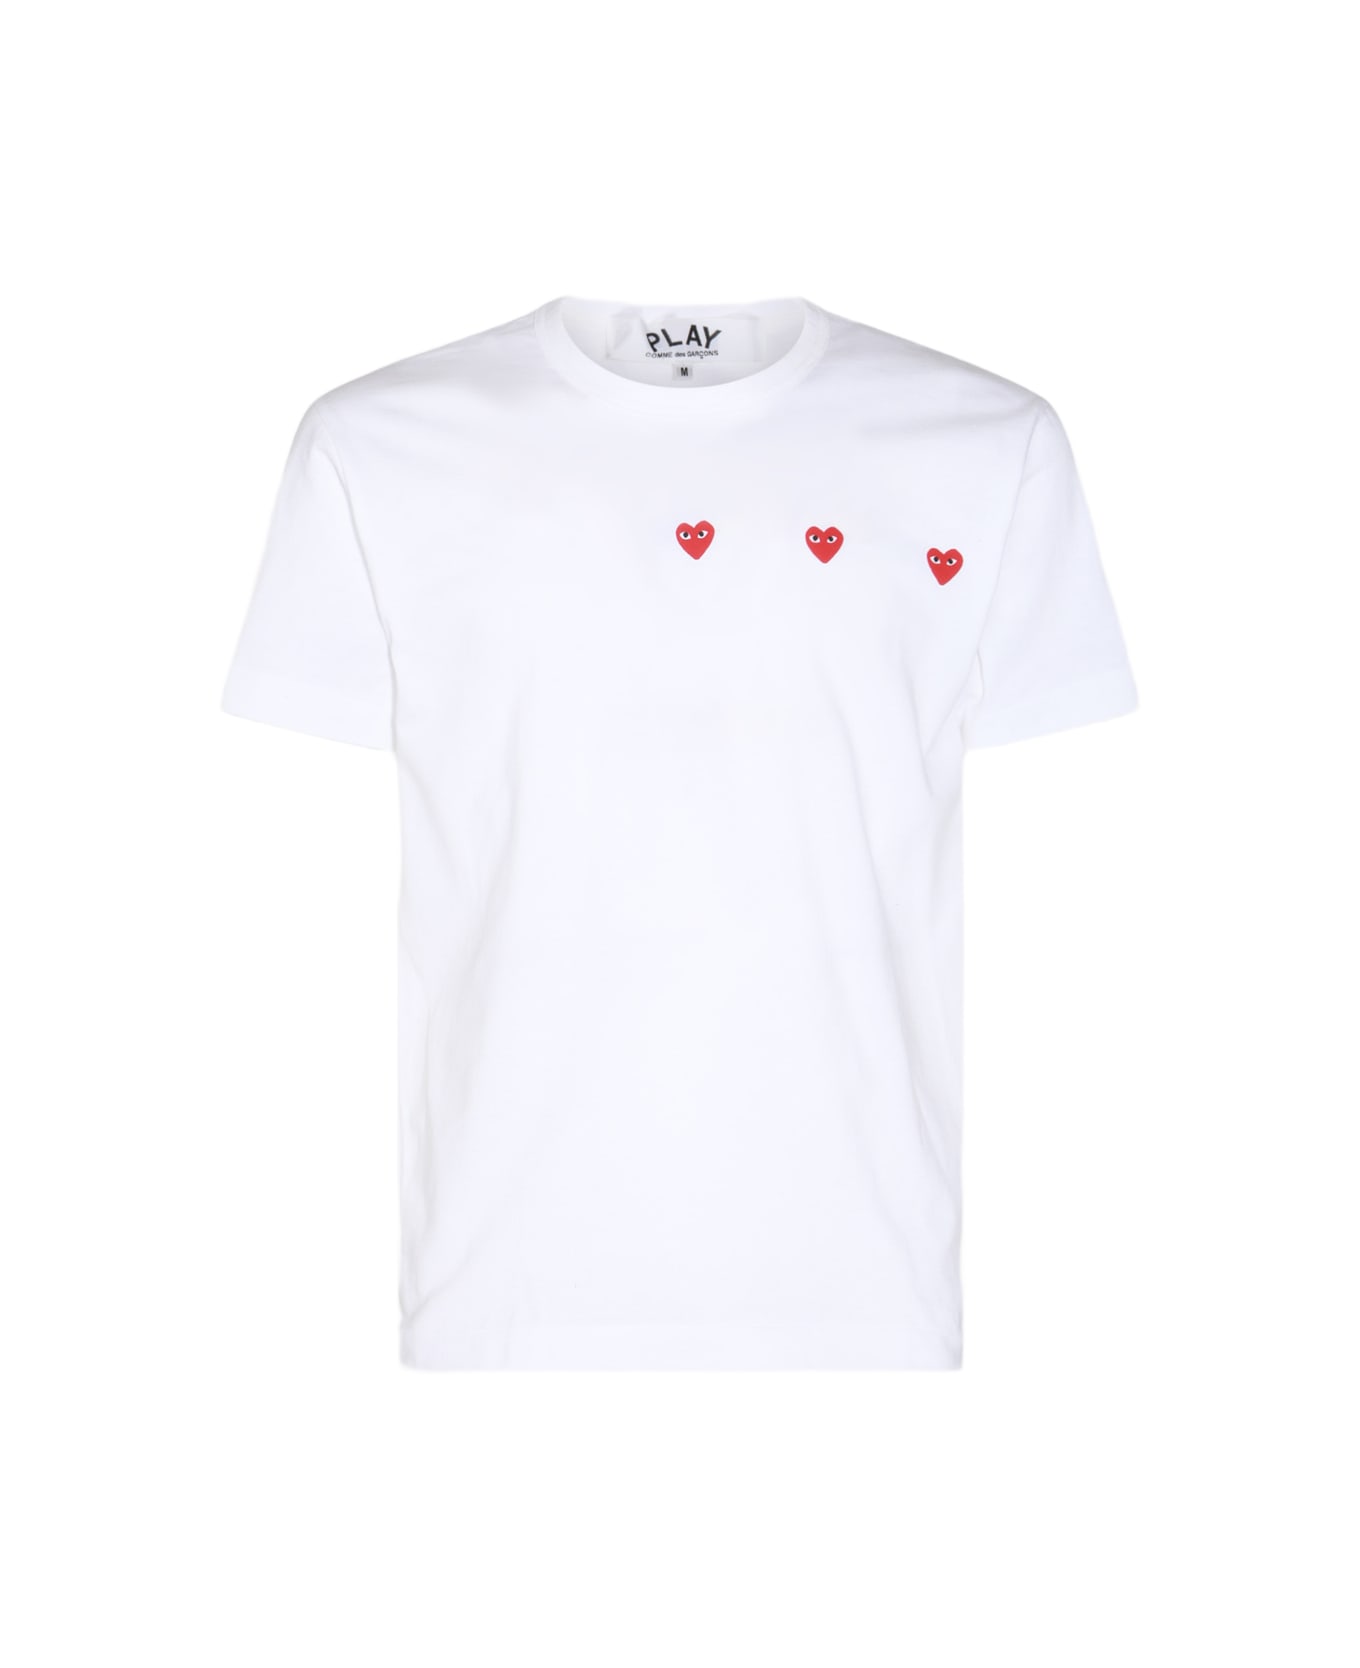 Comme des Garçons Play White And Red Cotton Play T-shirt - White Tシャツ